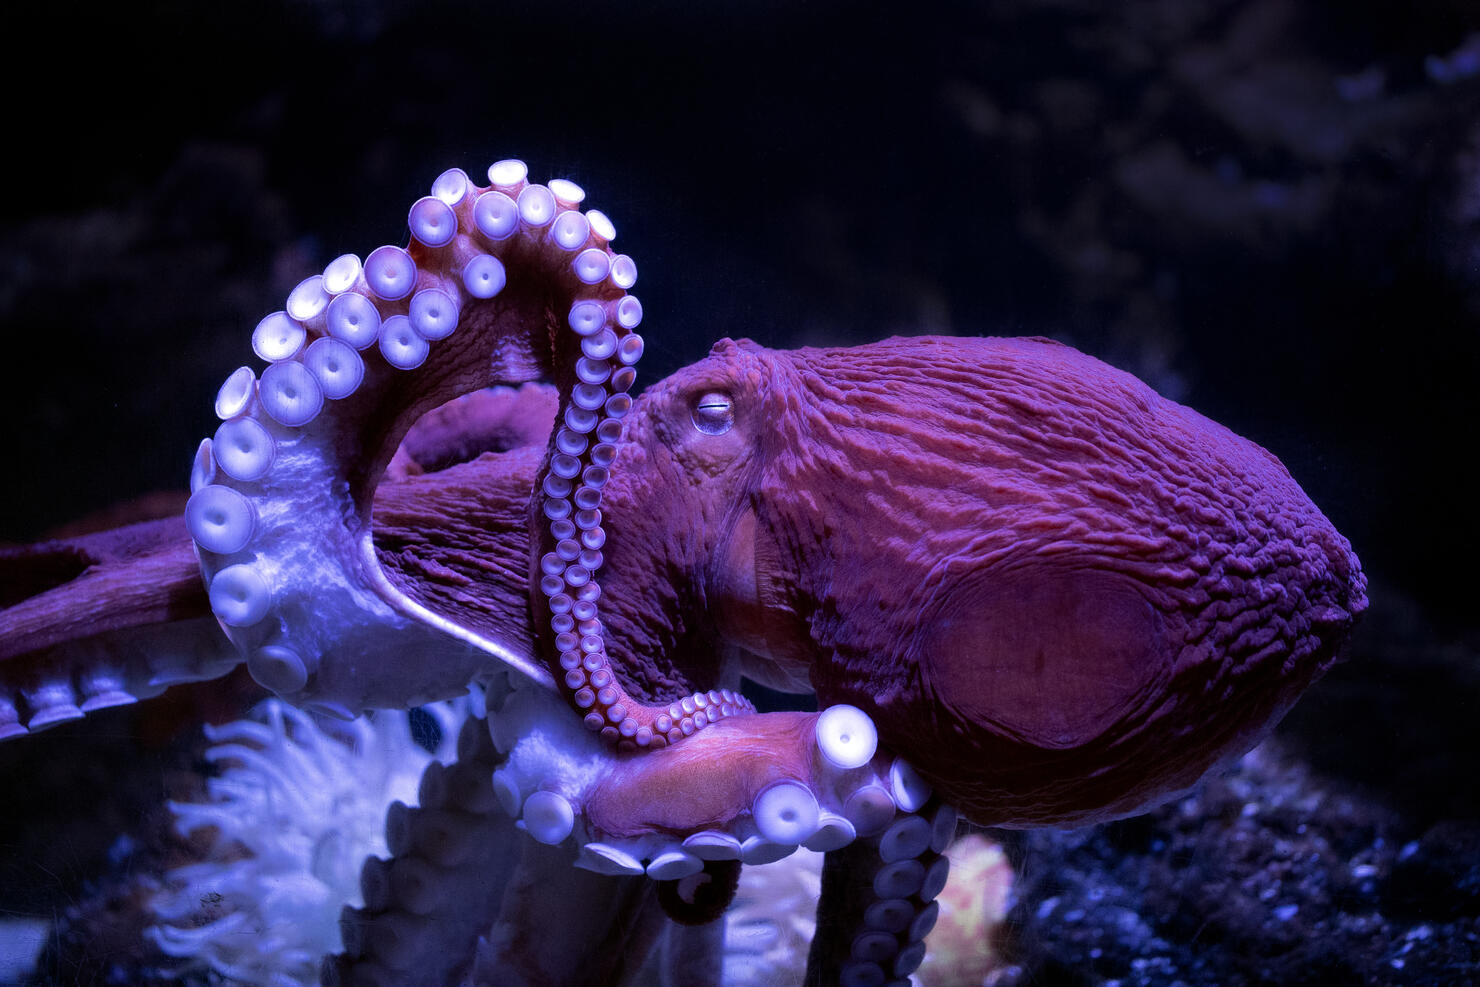 WATCH Wild Octopuses Throw Shells At Each Other In Underwater Fight